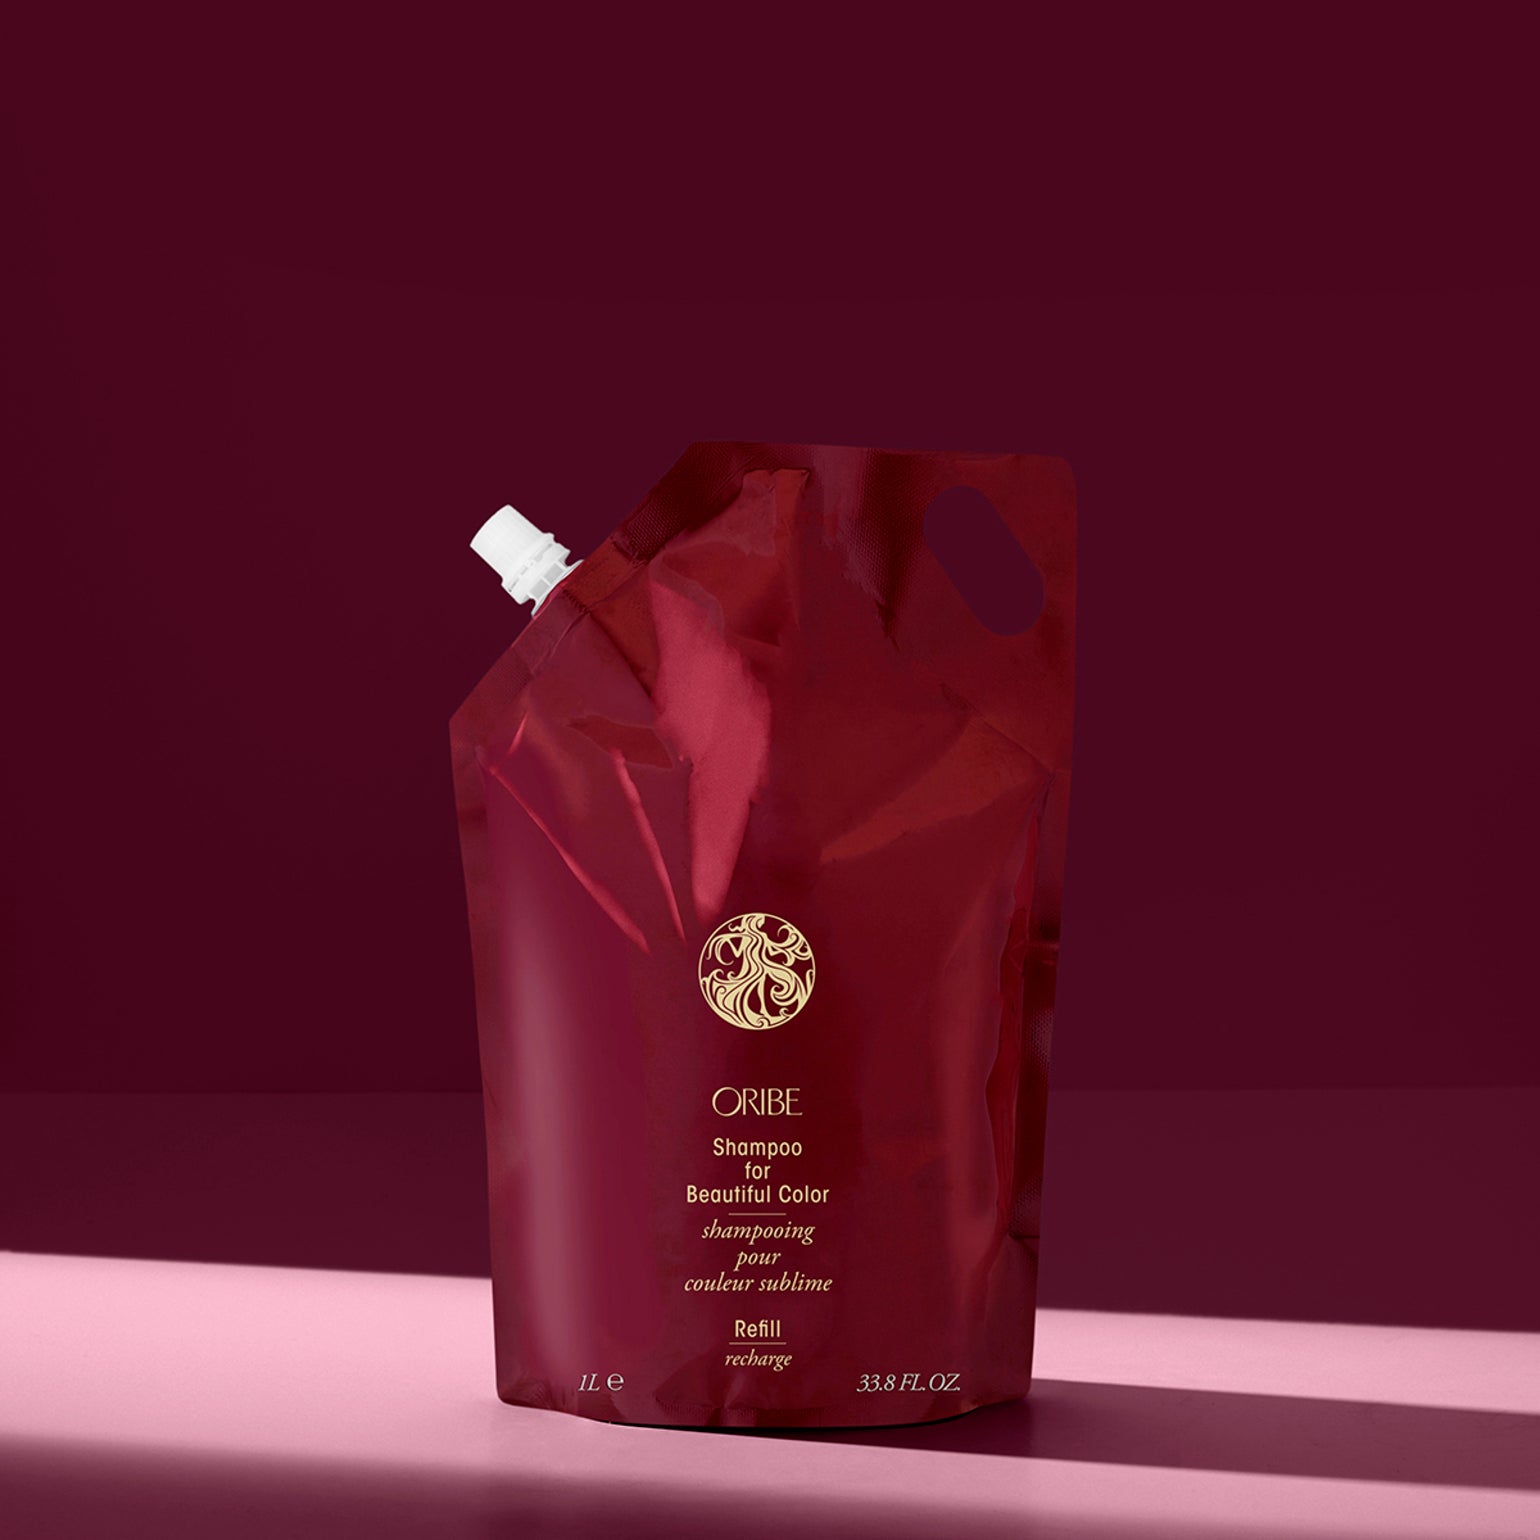 ORIBE Shampoo for Beautiful Color Litre Refill Pouch